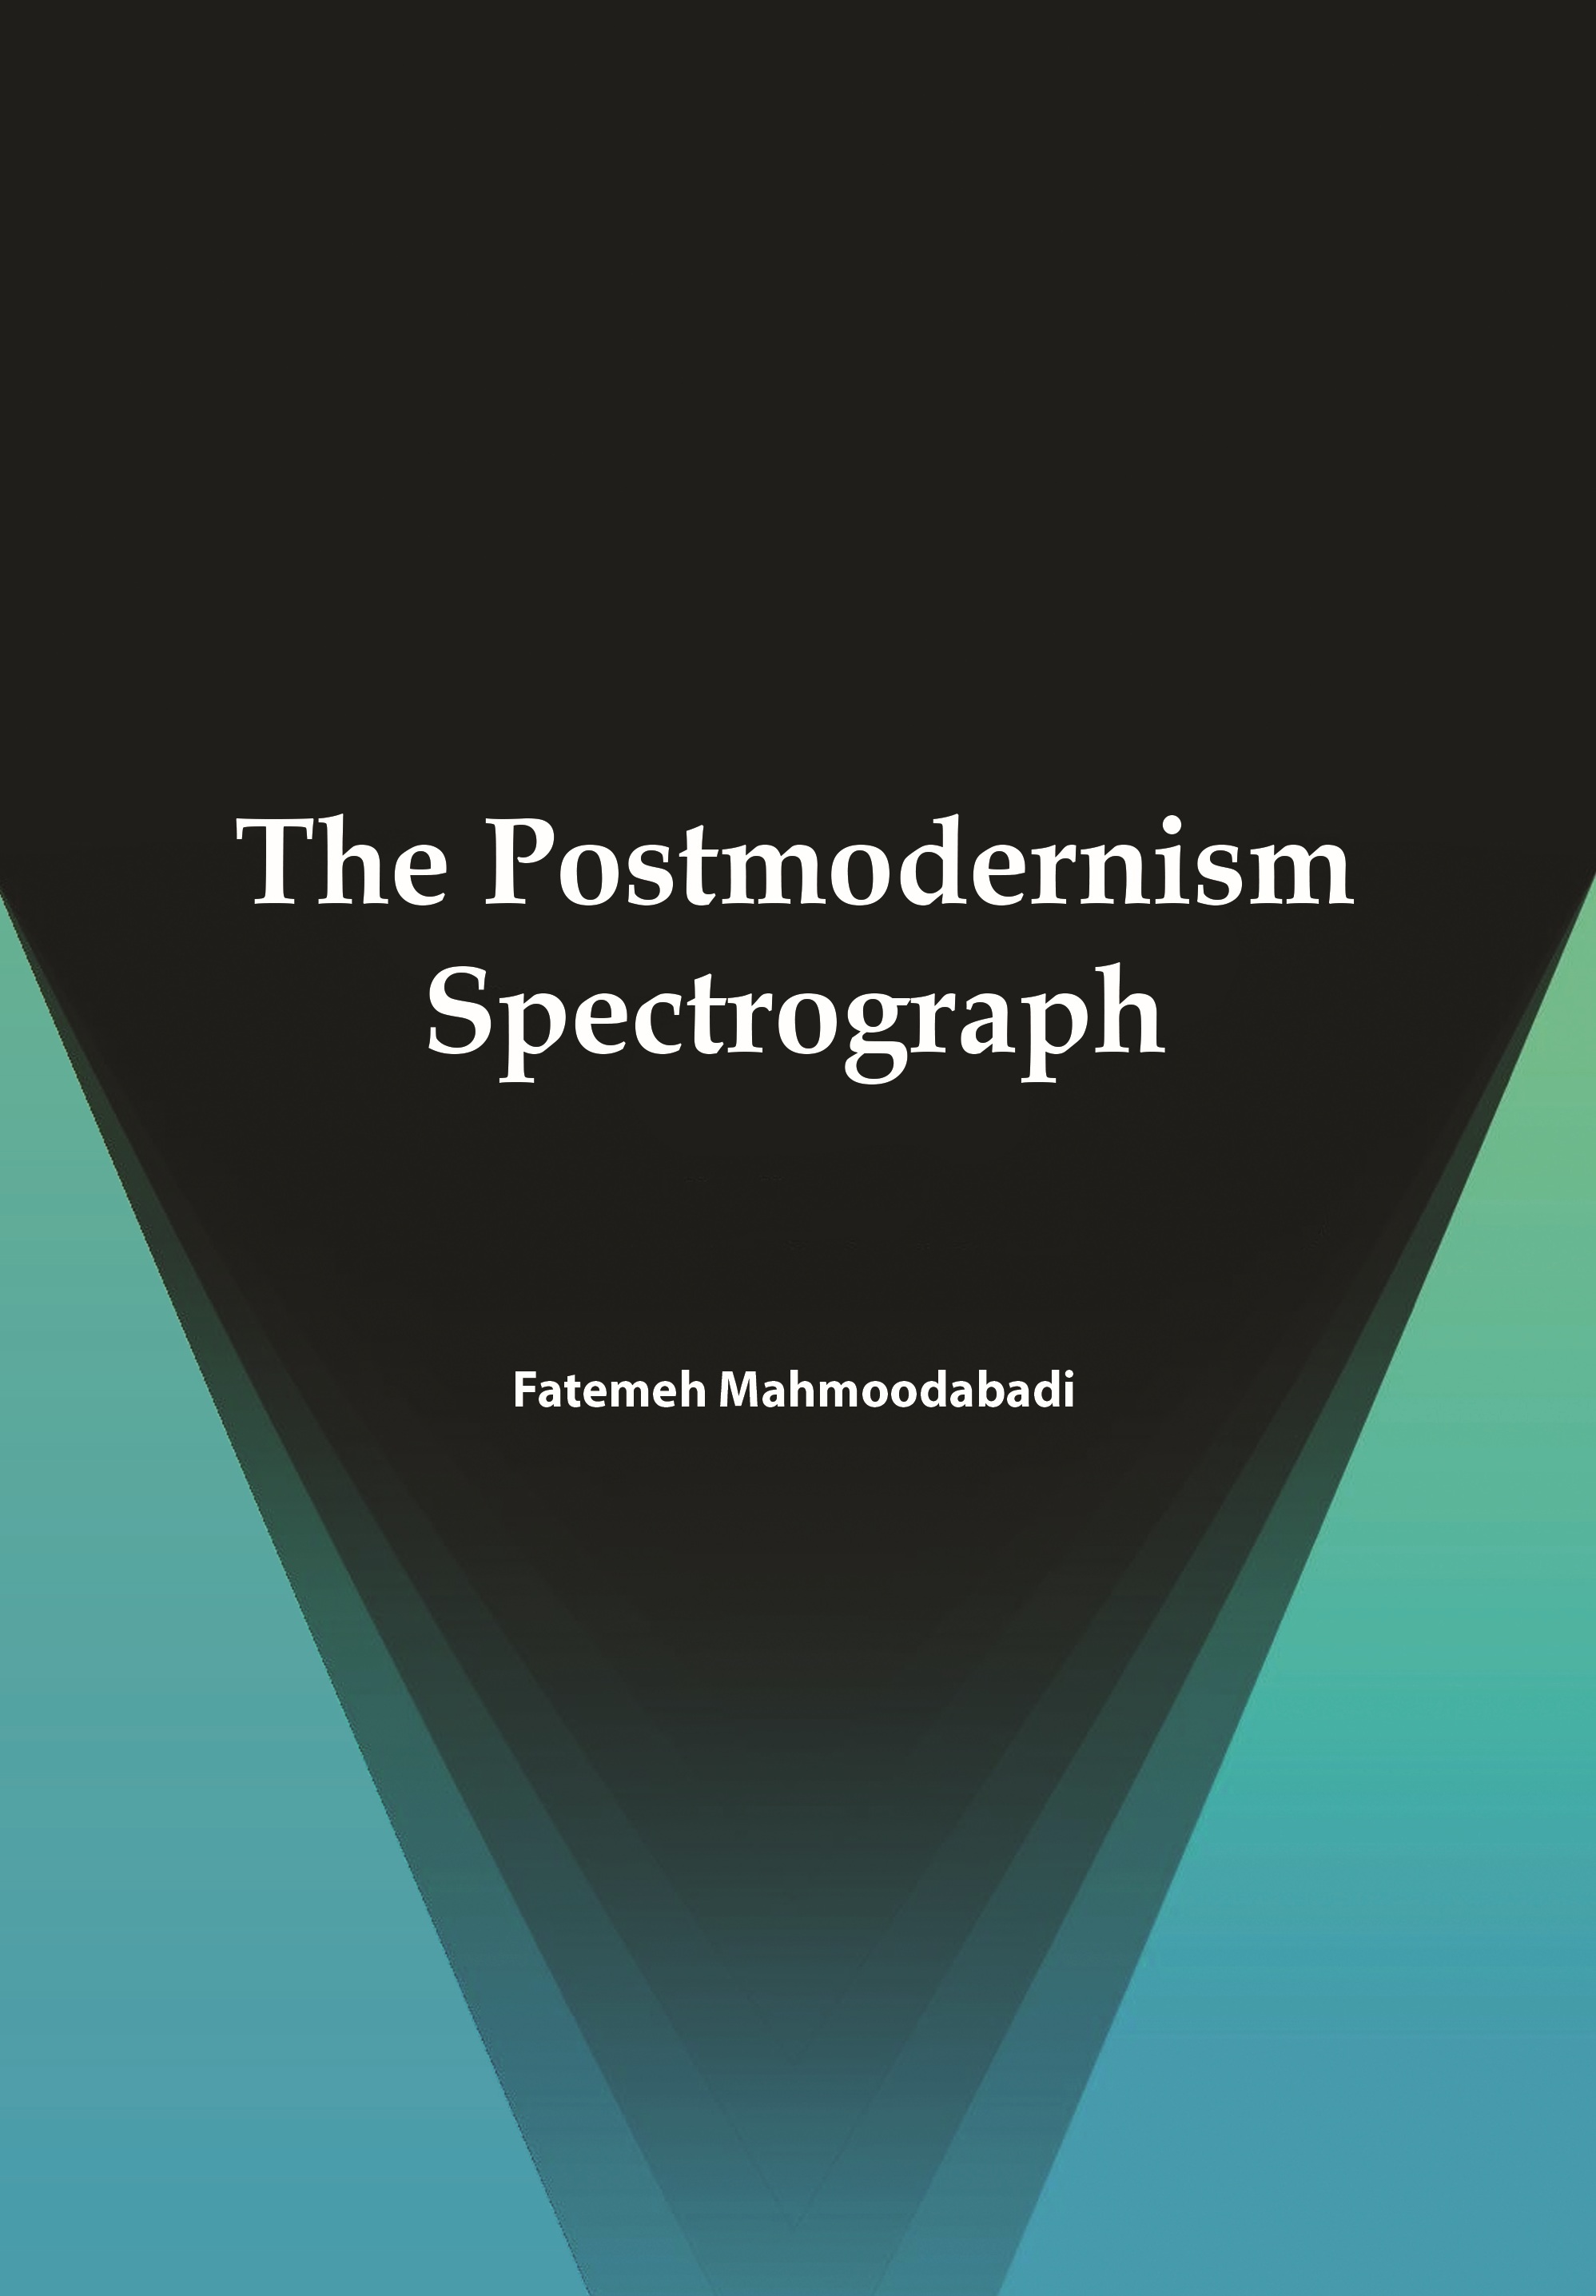 The postmodernism spectrograph